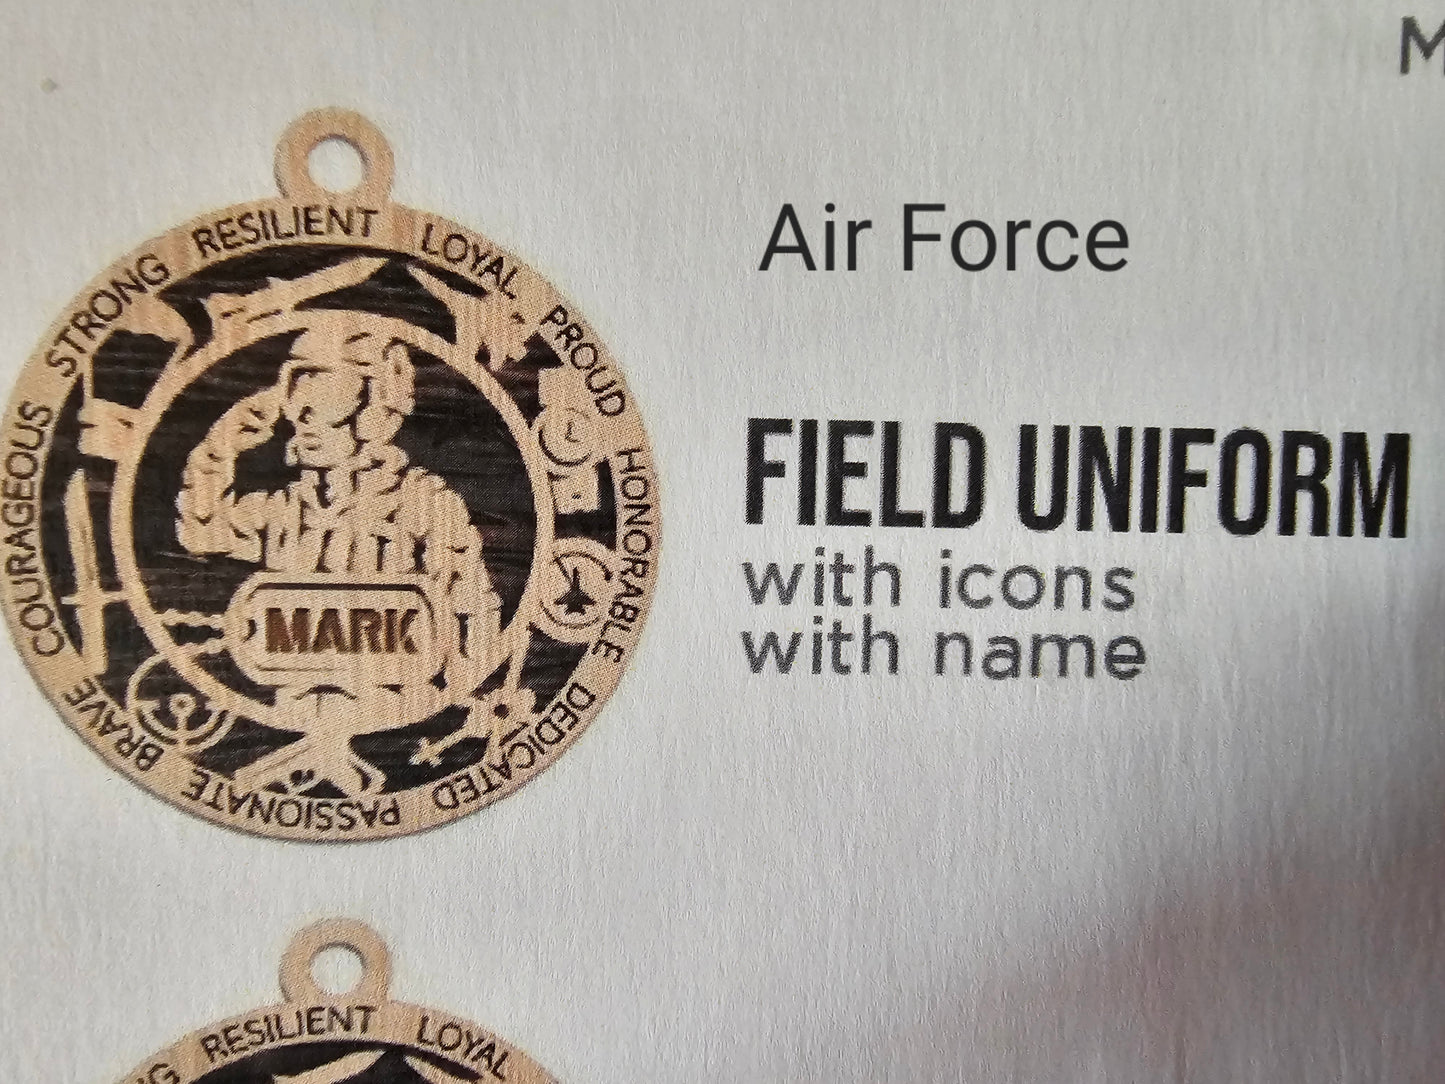 Armed forces, Army, Navy, Airforce, Marines, Military plaques, Military signs, Military ornaments